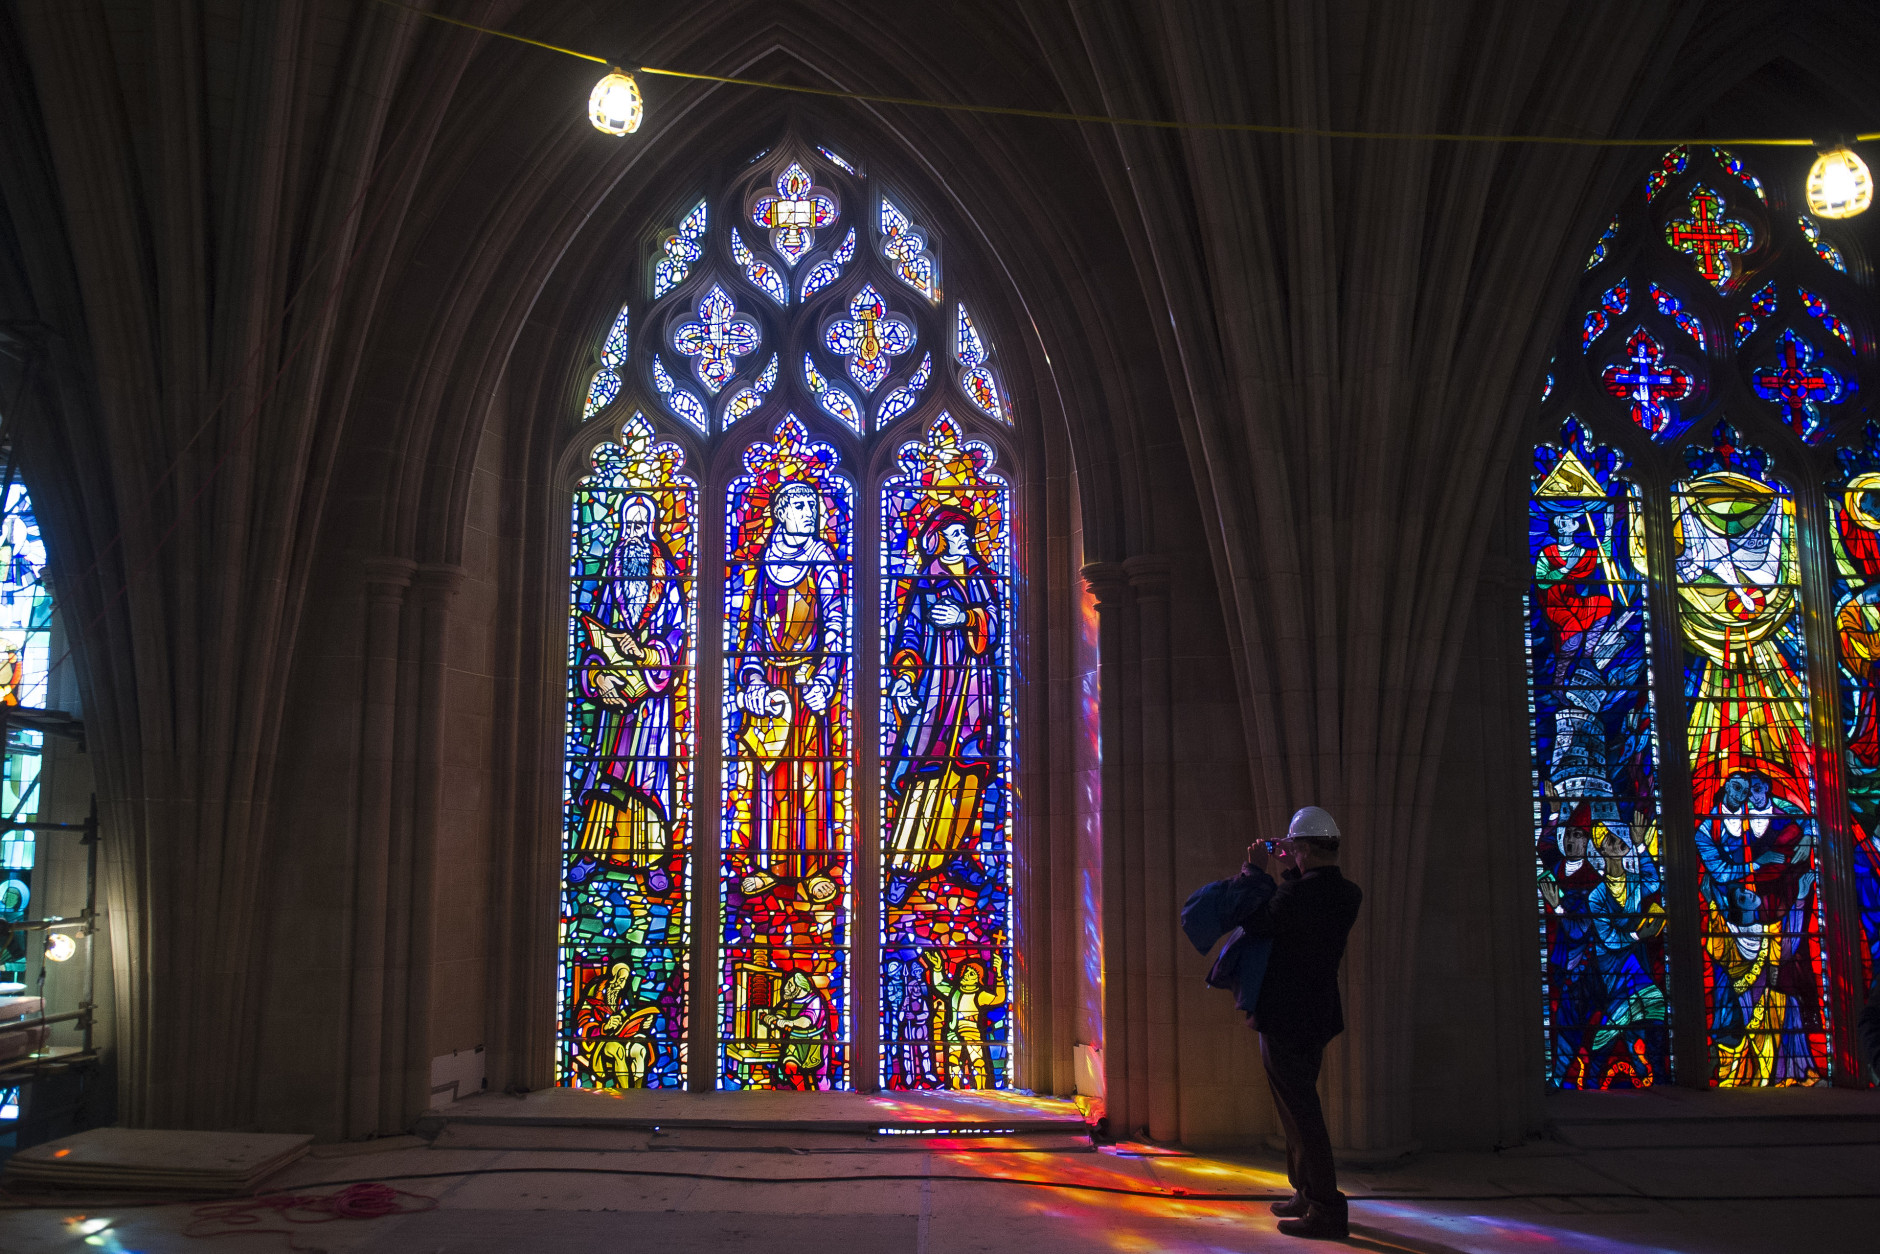 A reporter, standing on a scaffold platform 65 feet above the nave floor, takes a photograph of a recently cleaned and repaired stained glass window at  the Washington National Cathedral in Washington, Wednesday, Feb. 18, 2015. This marks the completion of the first phase in the building's $32 million restoration effort. (AP Photo/Cliff Owen)